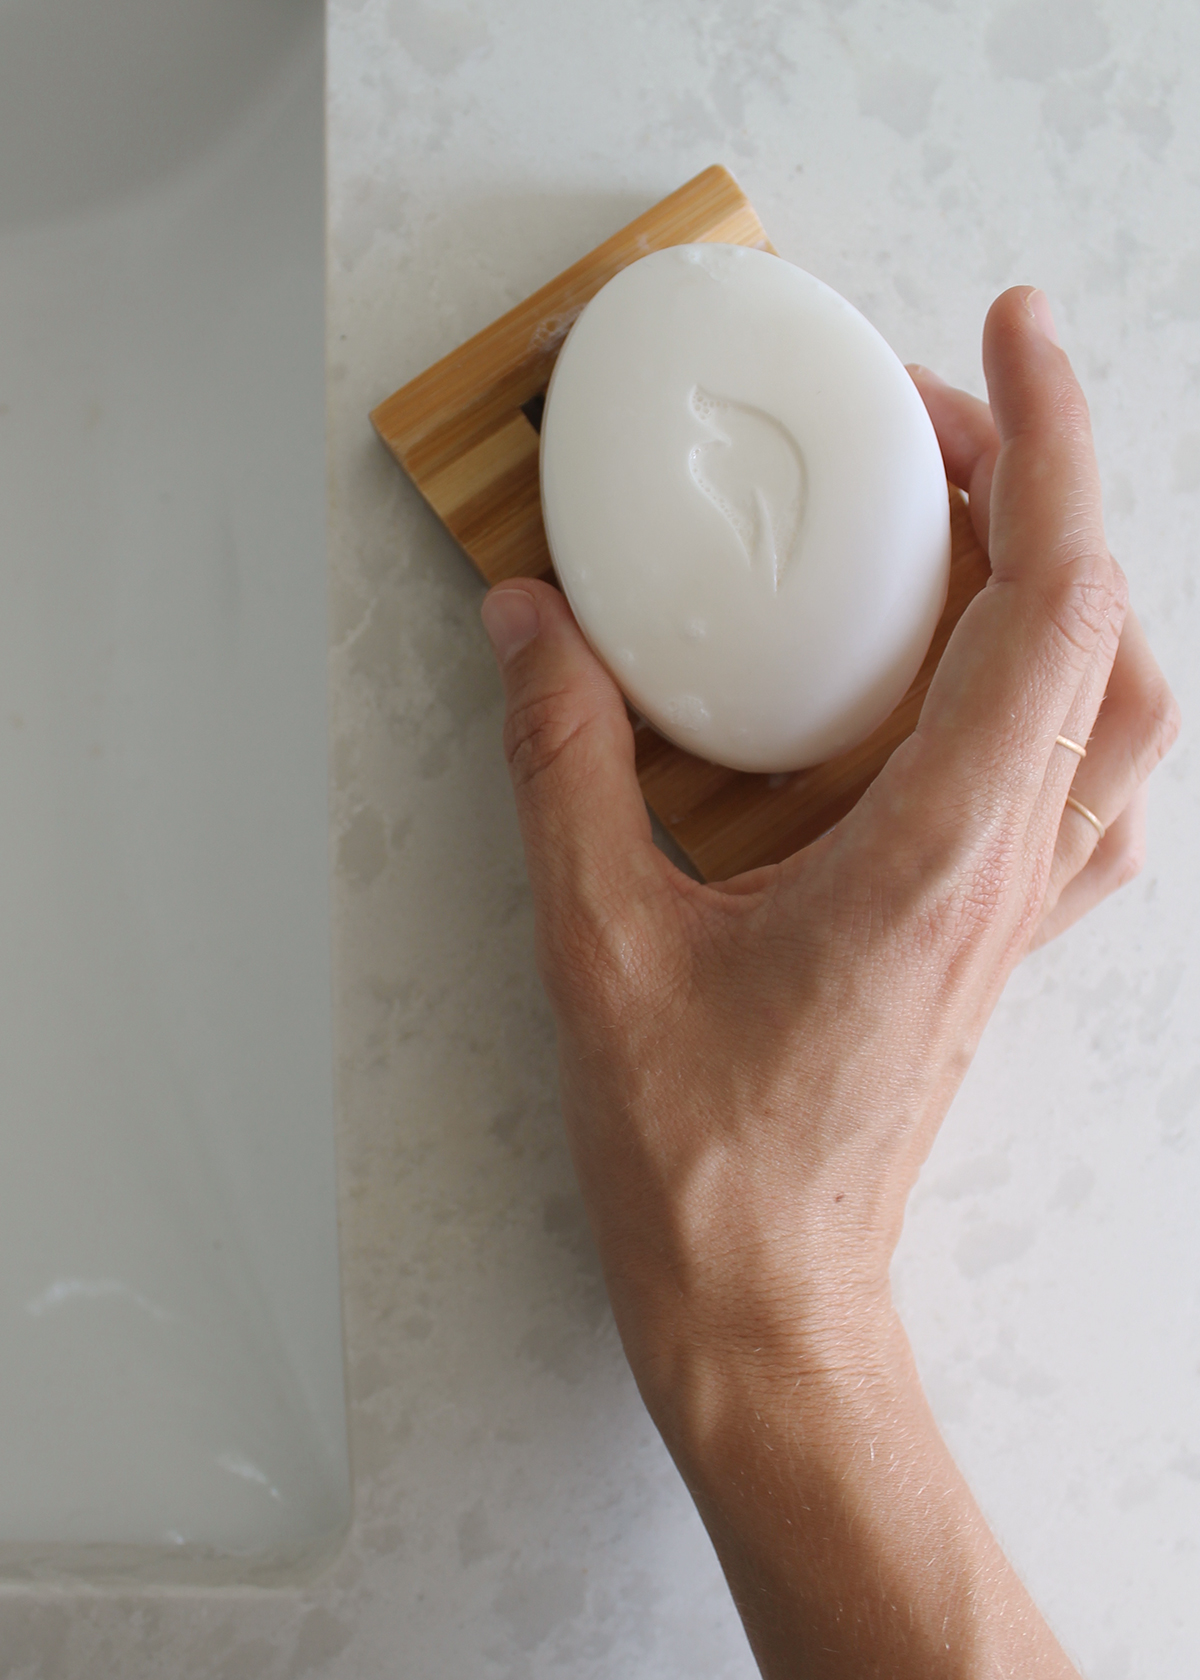 Does Soap Expire? How to Know if Old Soap is Still Effective